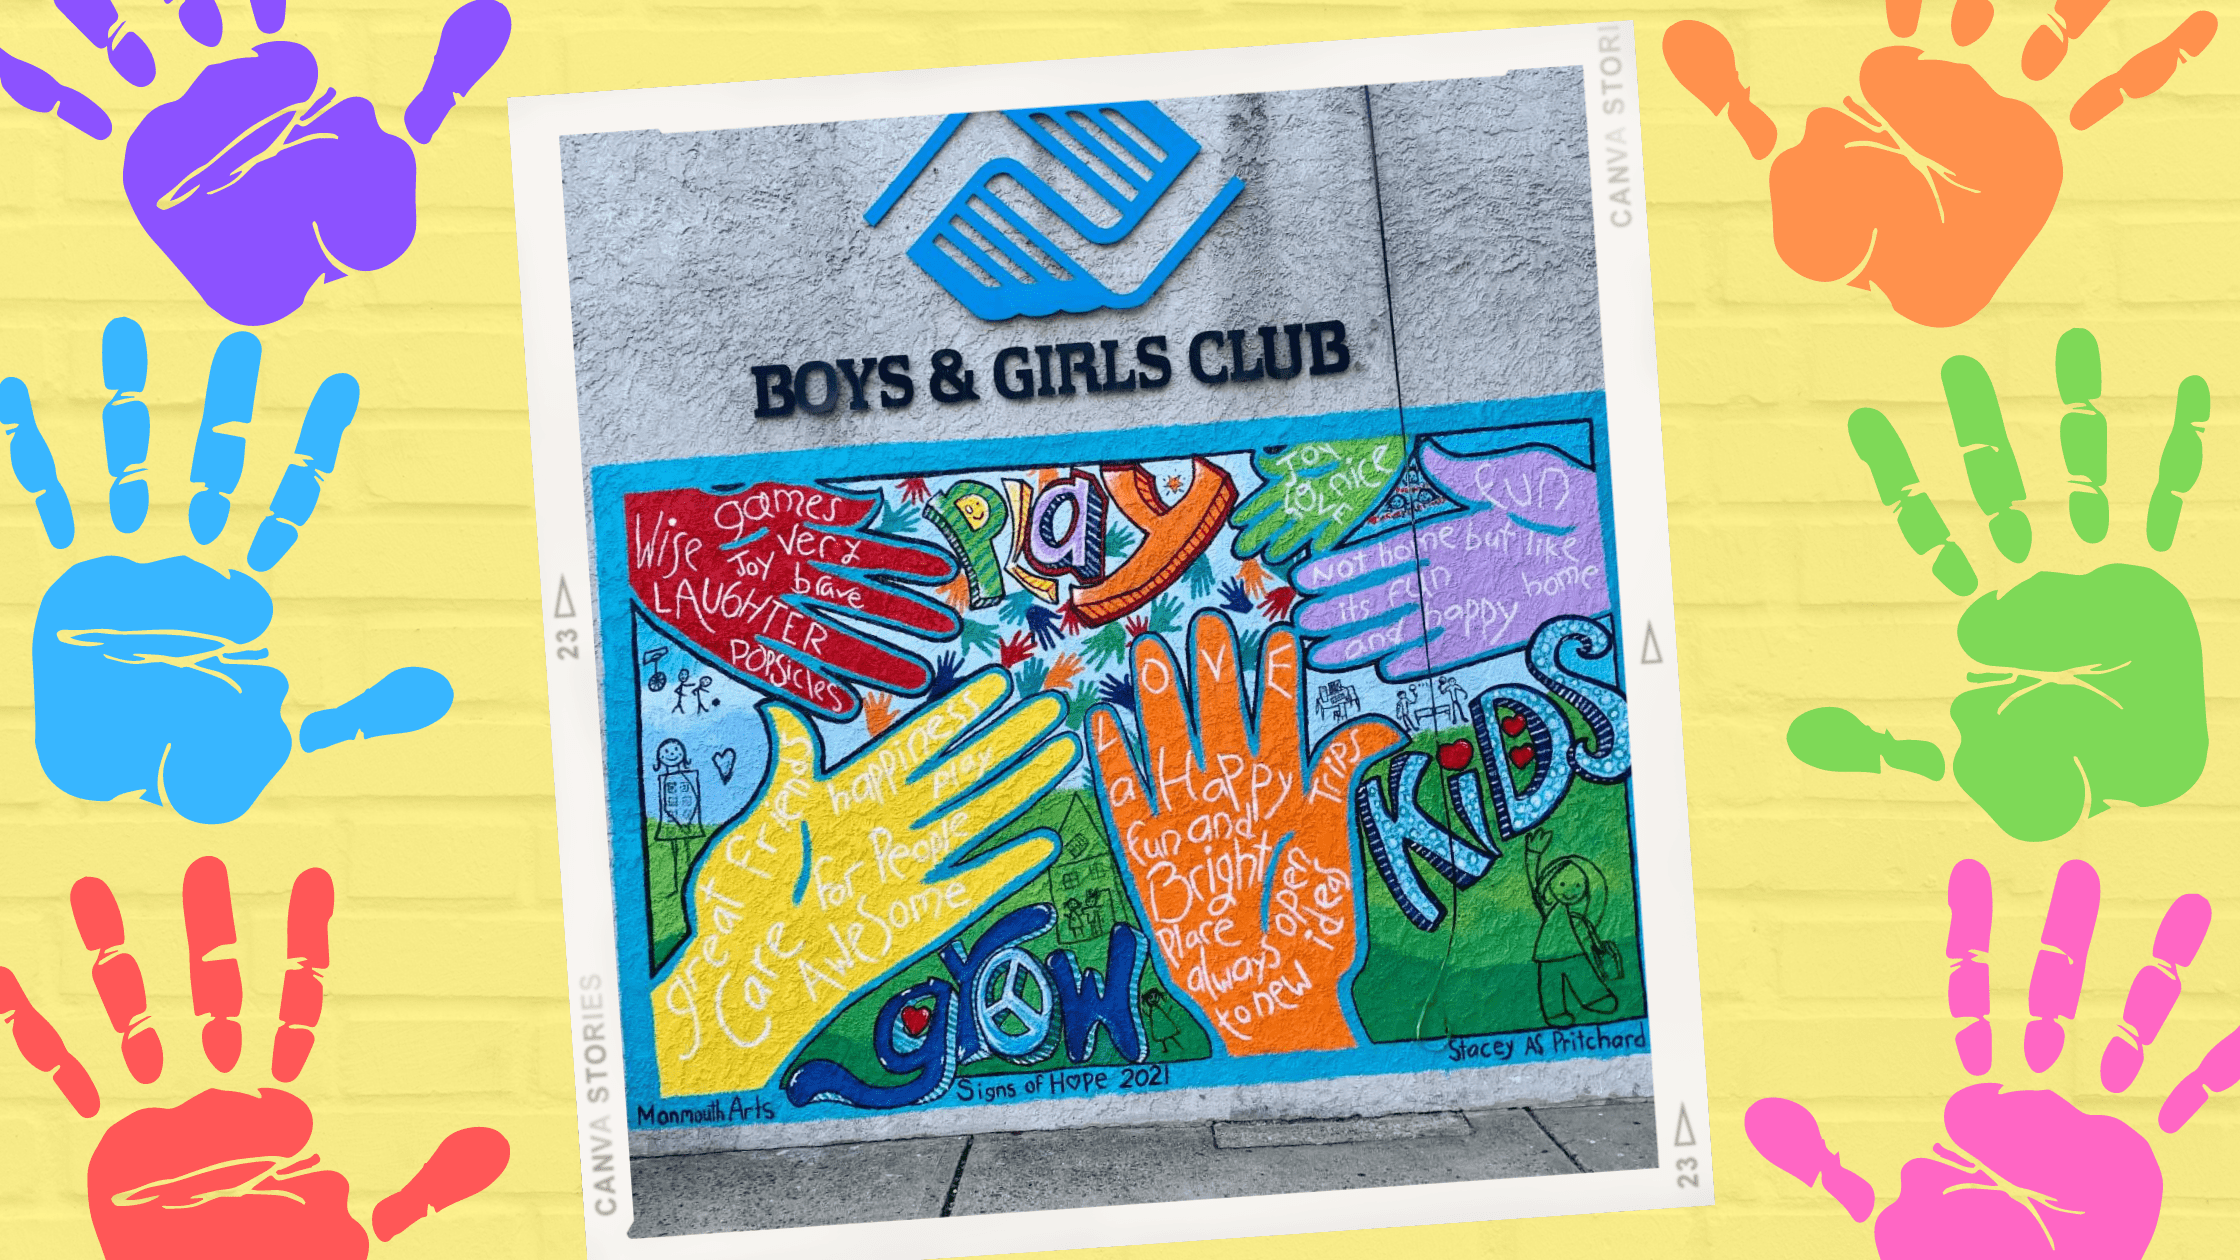 Graphic of new Red Bank Boys & Girls Club Mural